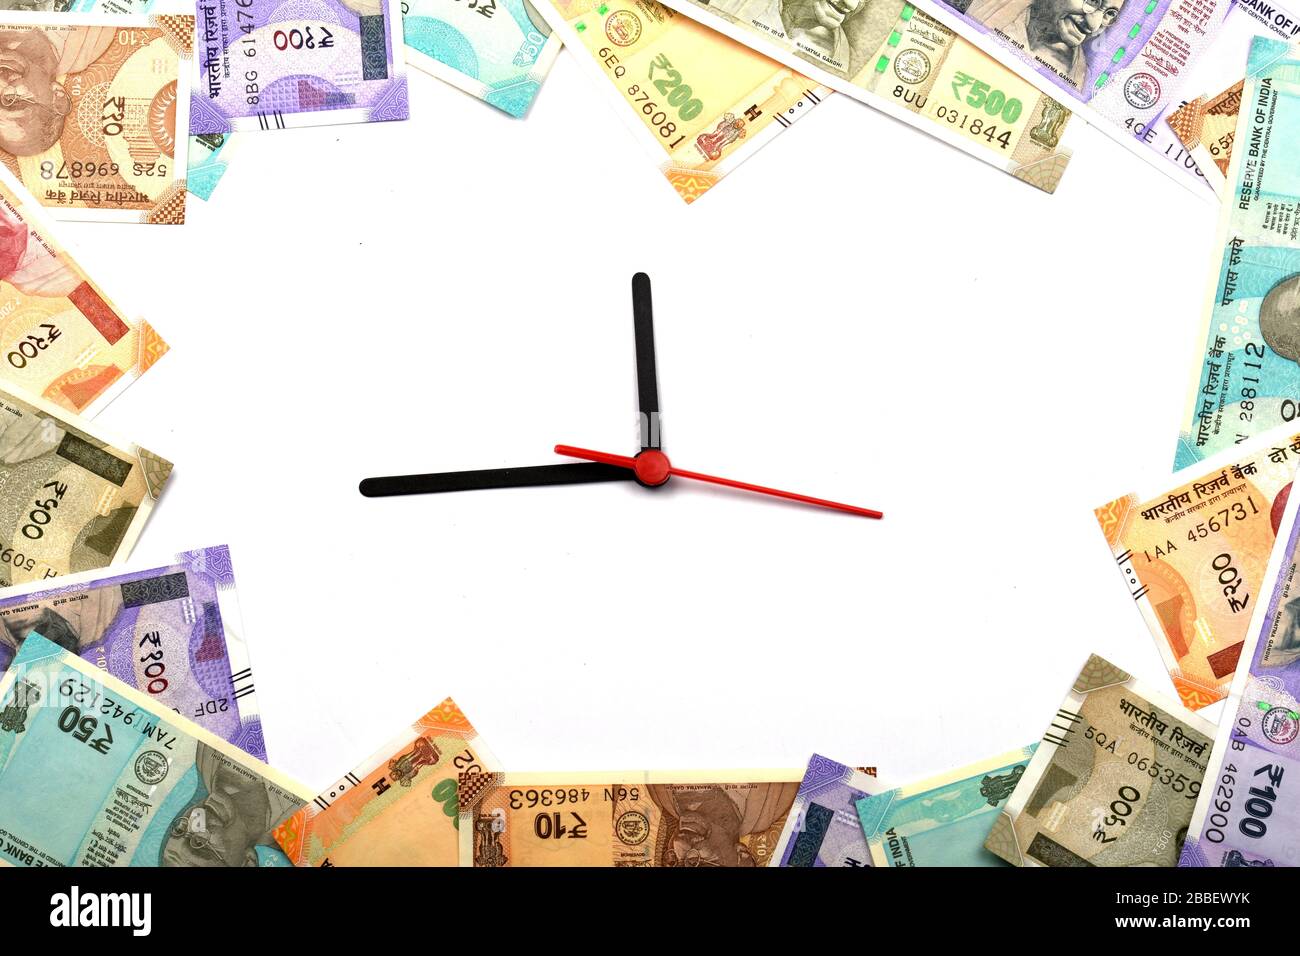 Time is Money,Time and money concept, Indian Currency, Rupee ...